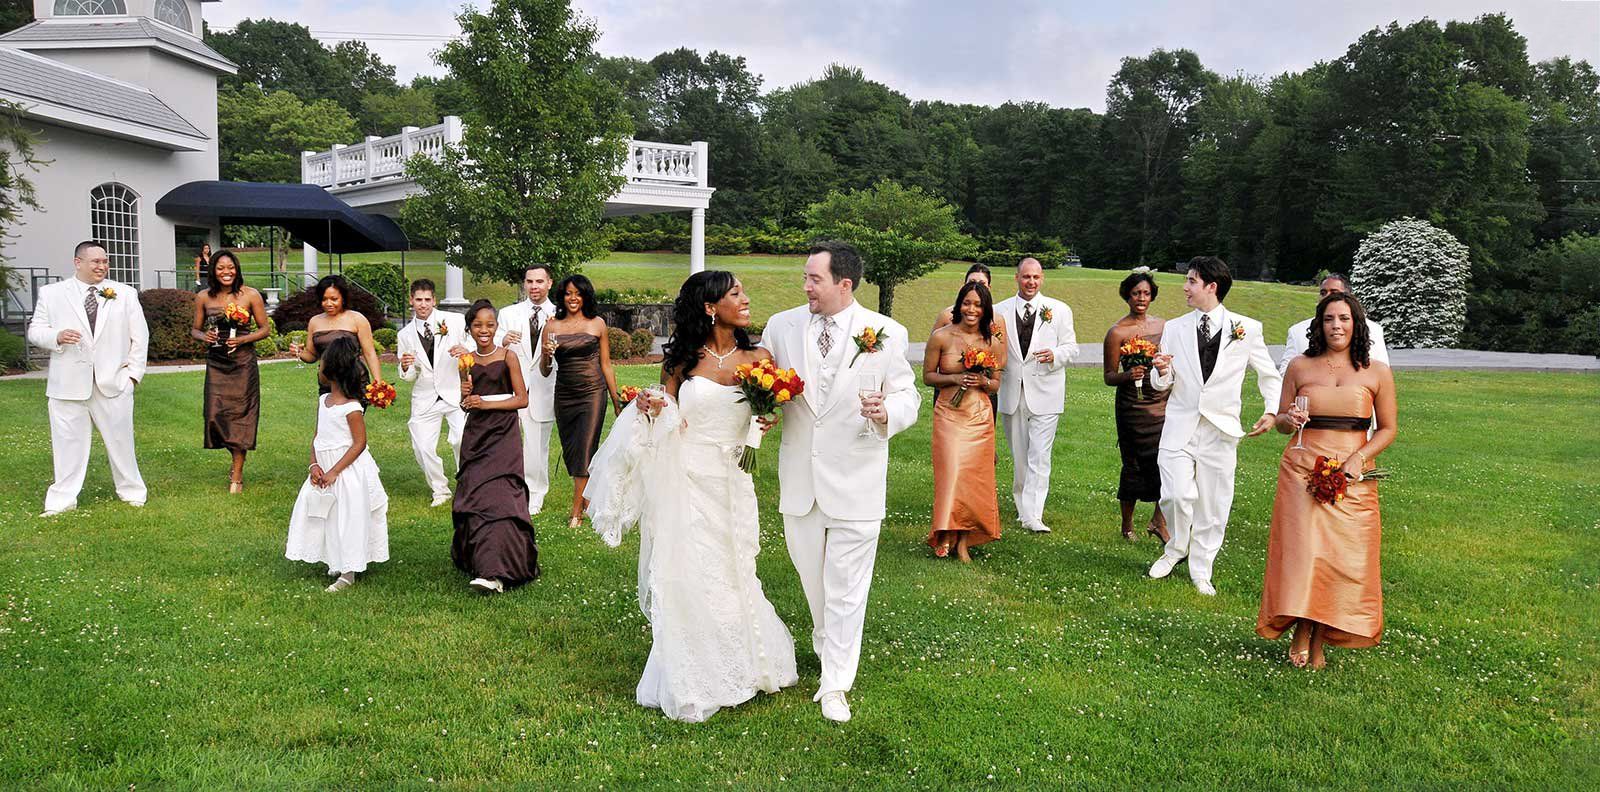 a bride and groom are walking with their wedding party after major photo retouching